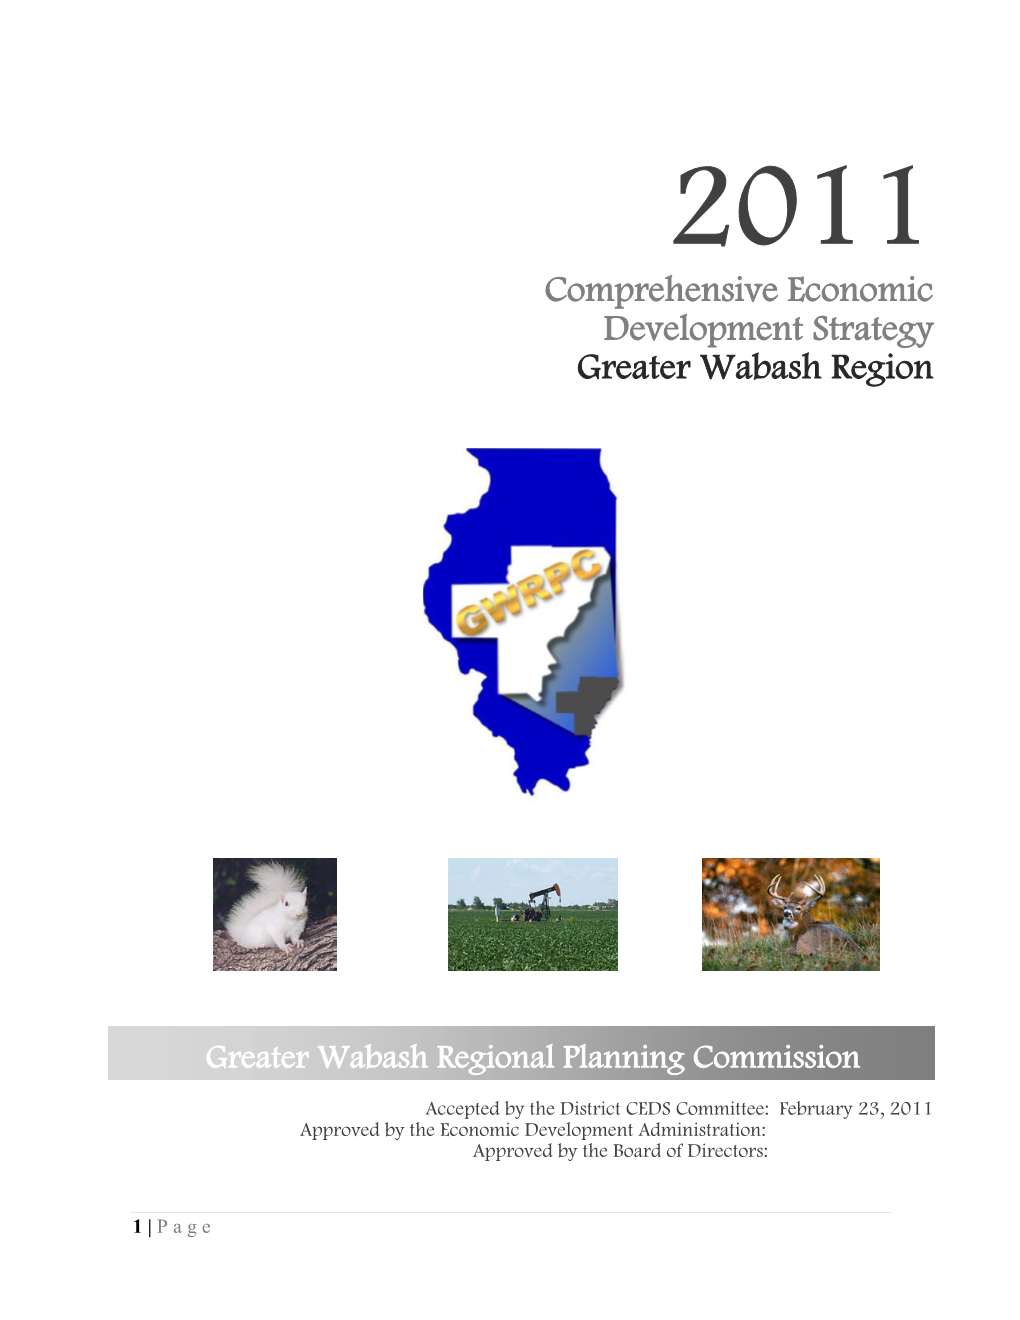 Greater Wabash Regional Planning and Development